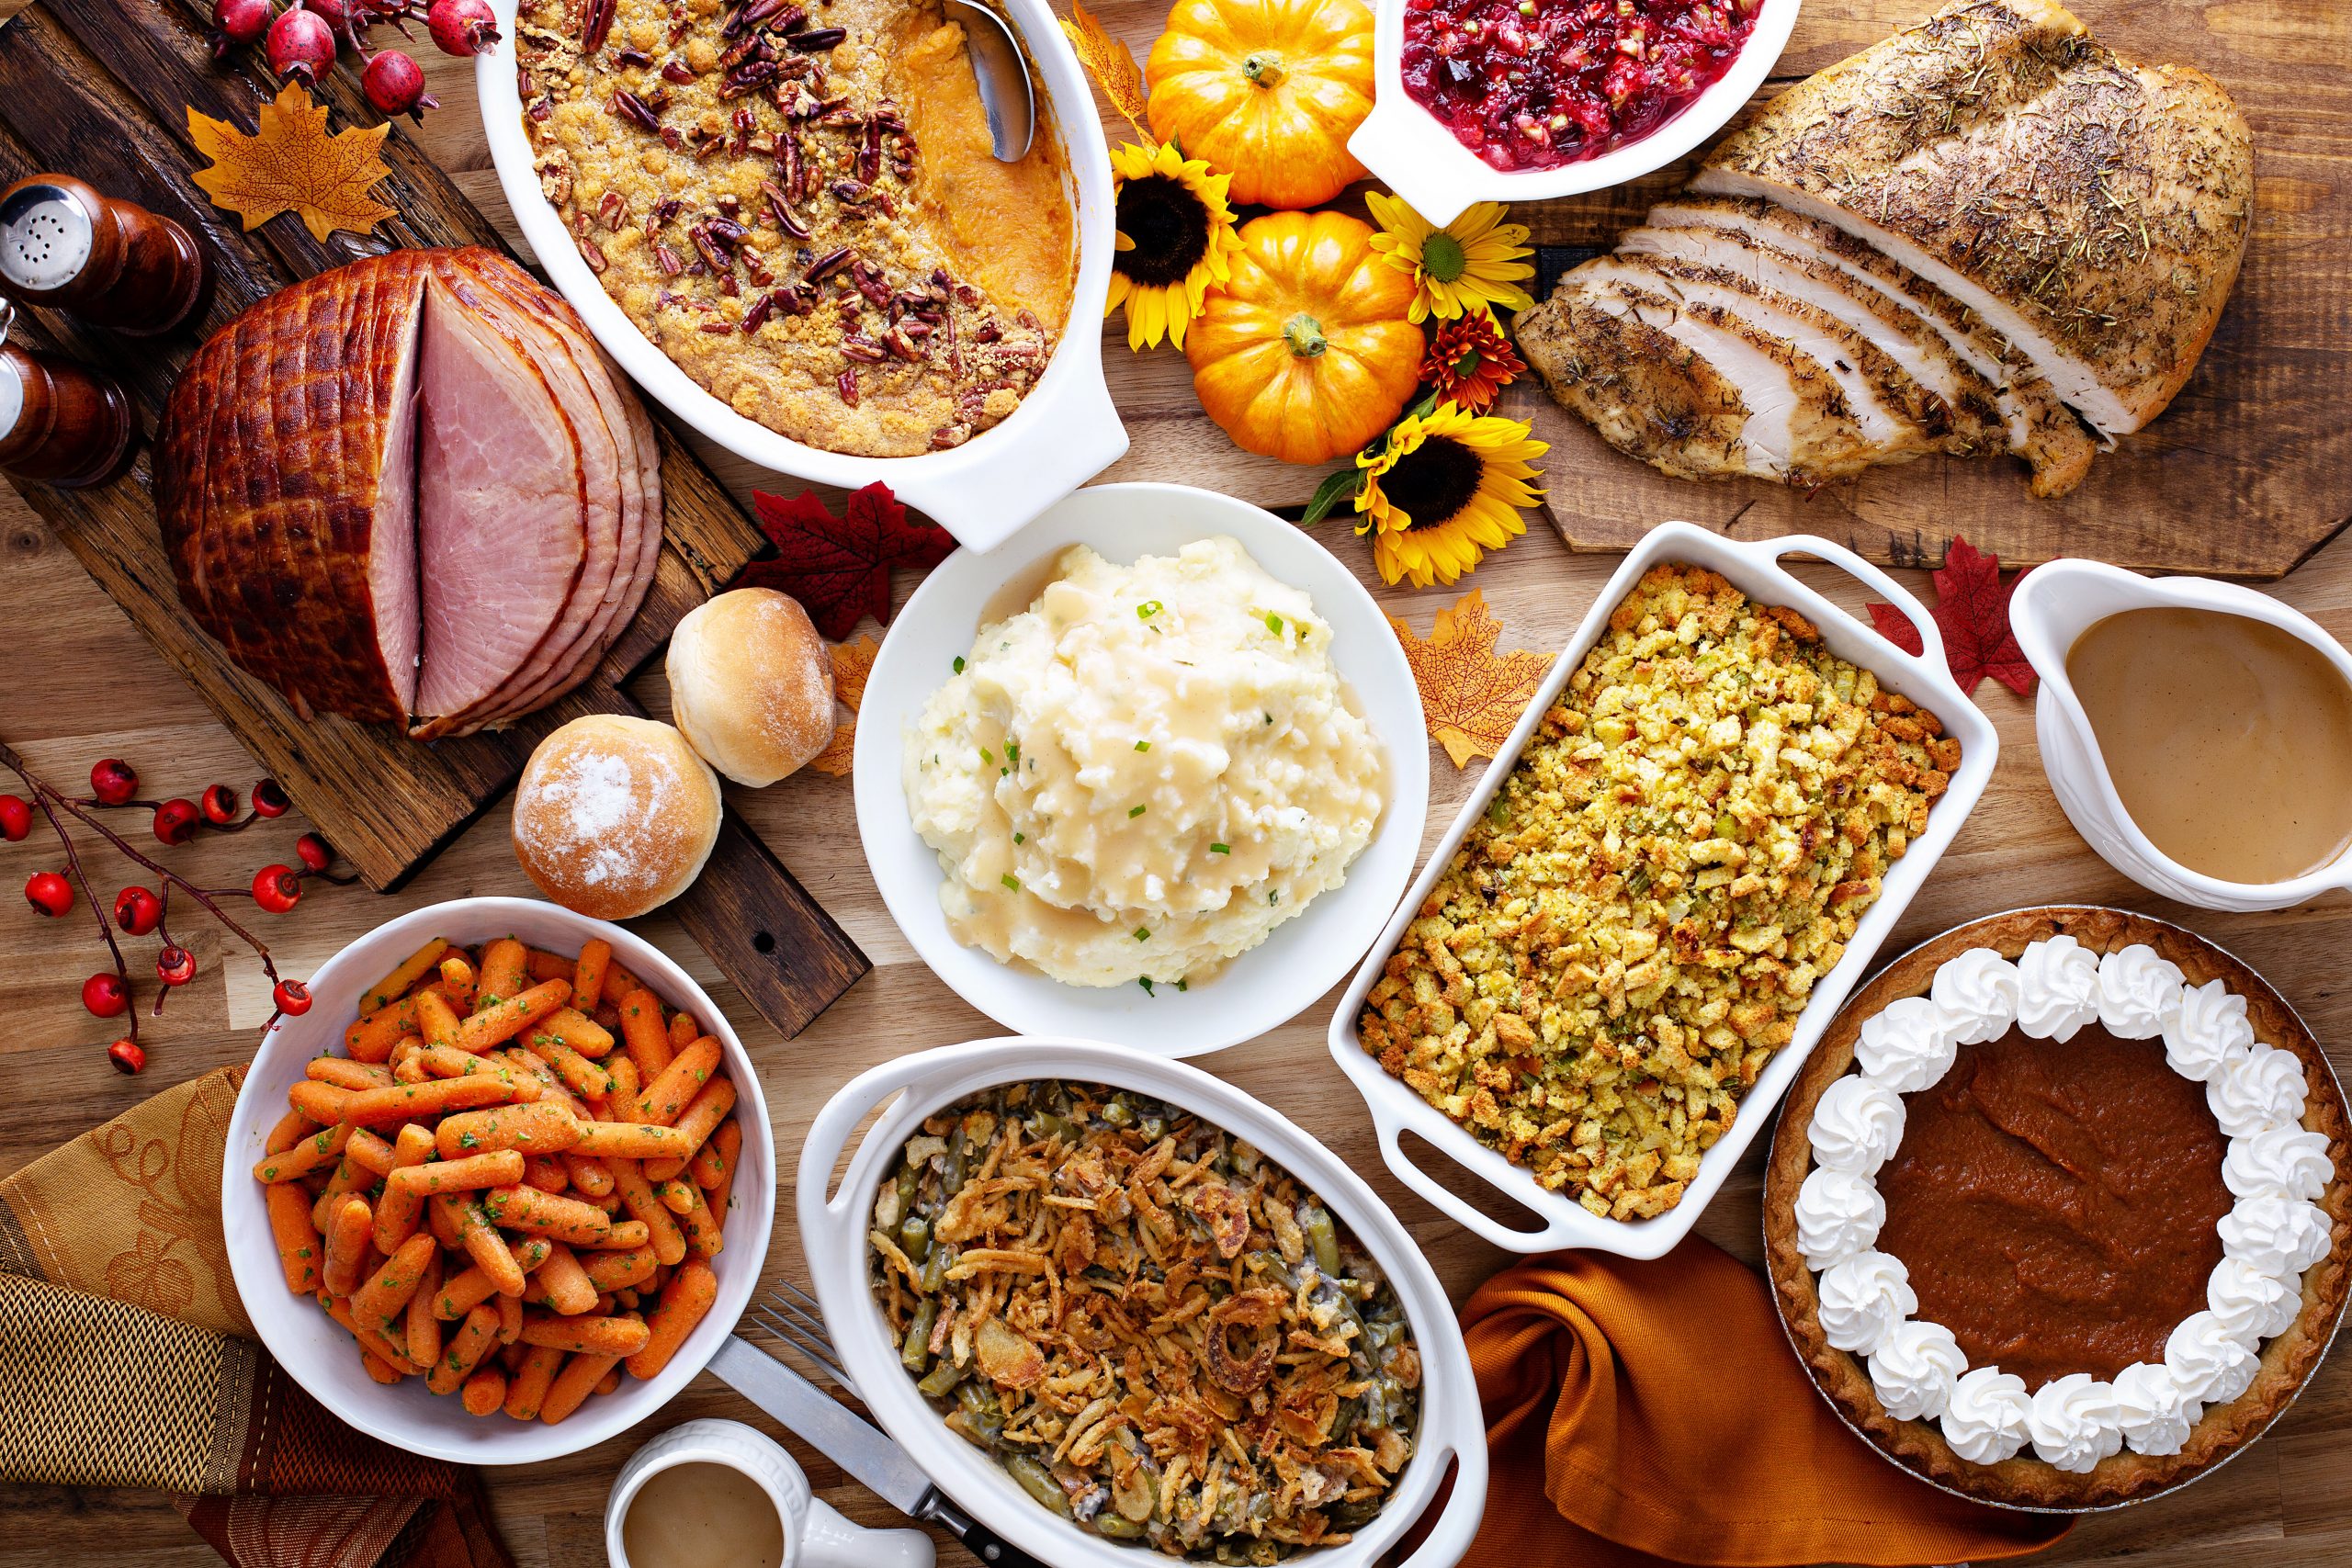 How To Eat While Out Of Town For the Holidays